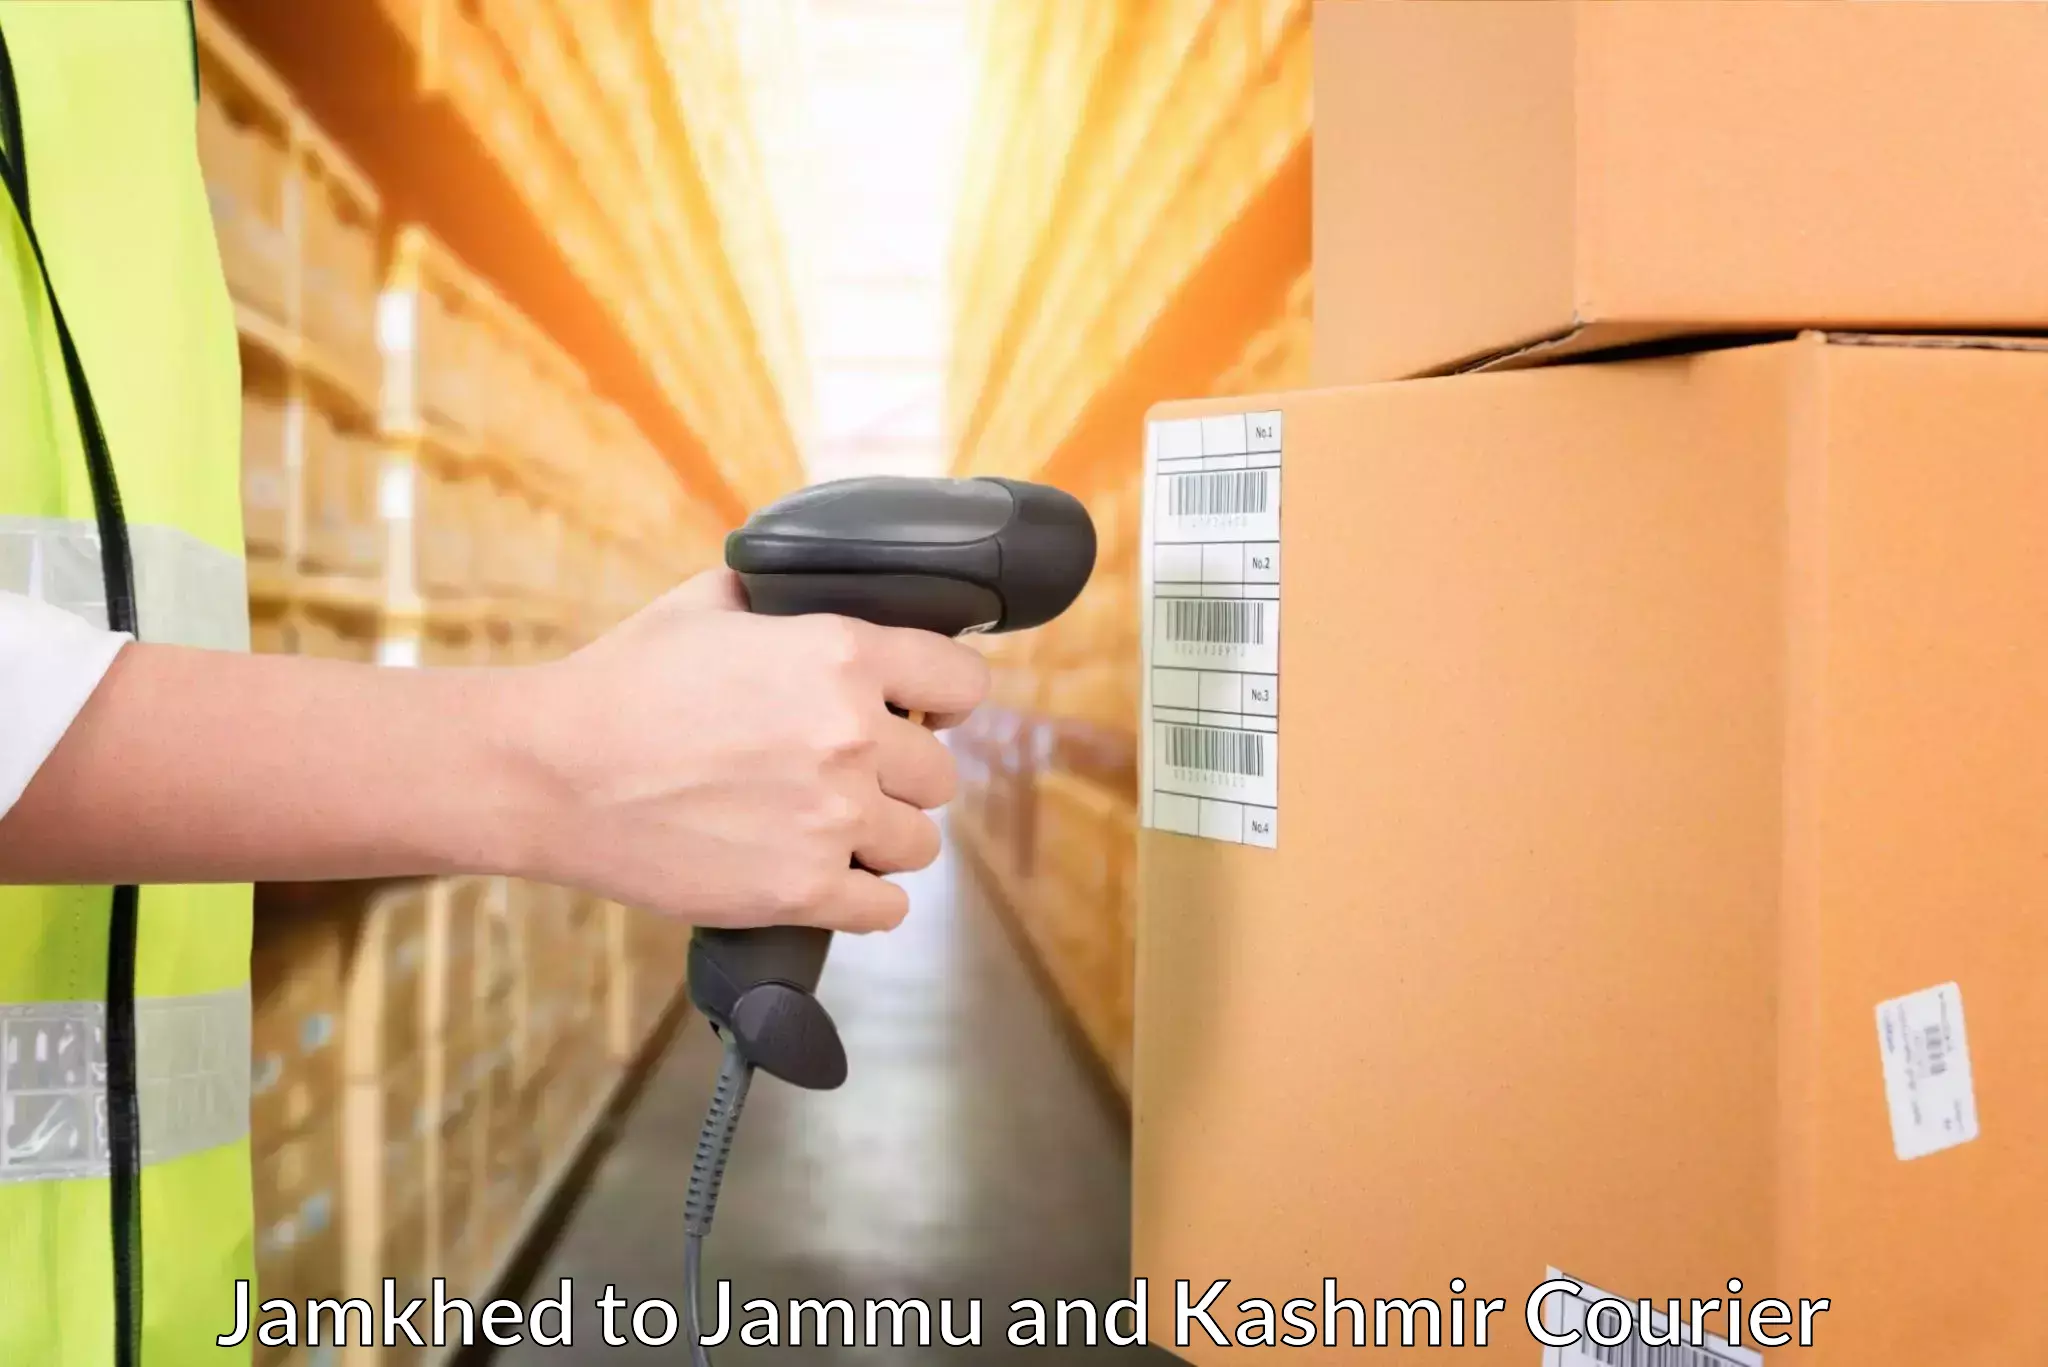 Nationwide delivery network Jamkhed to Jammu and Kashmir